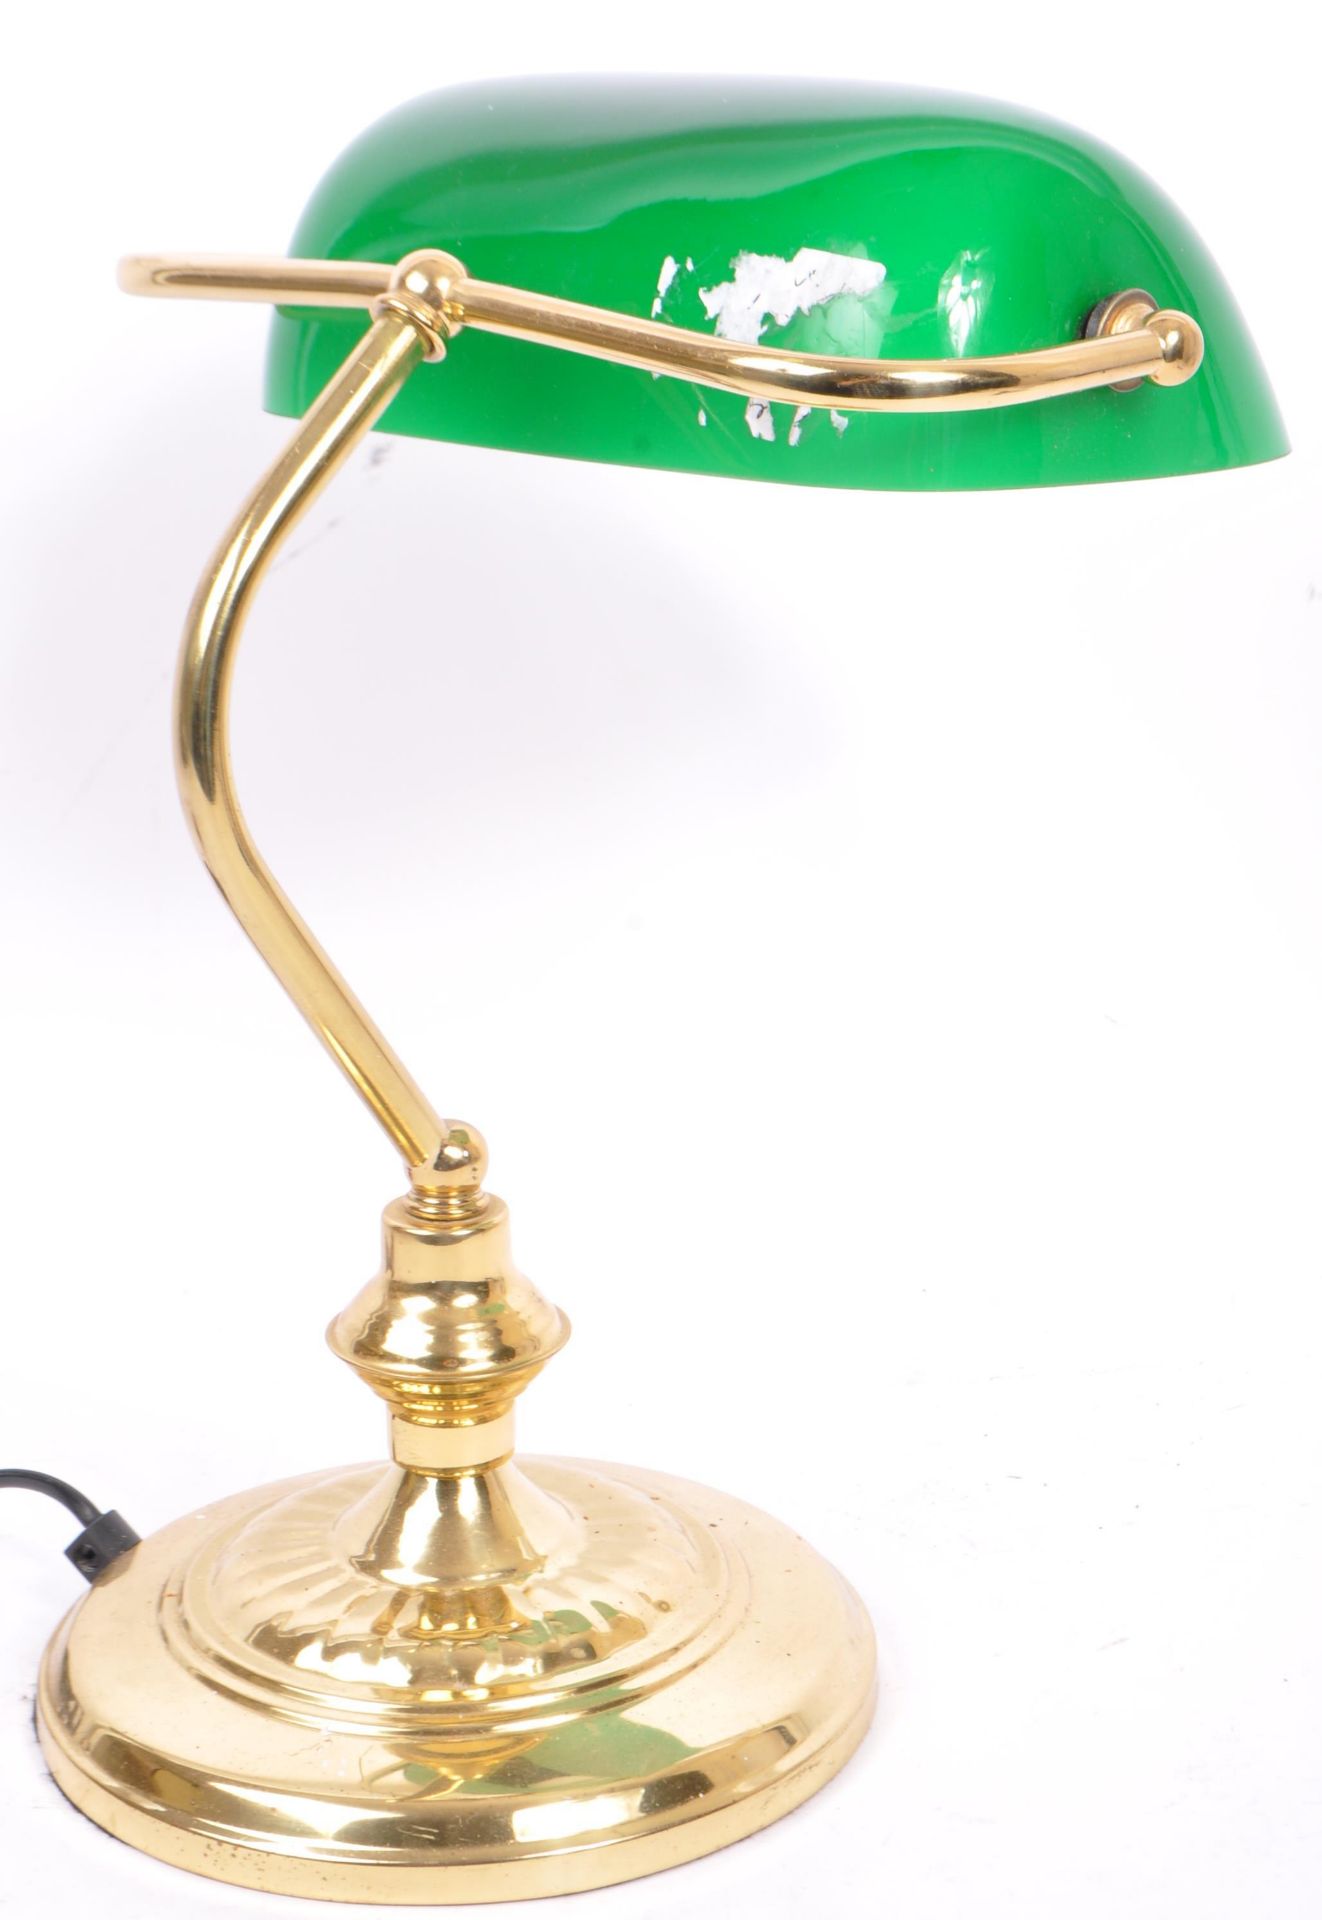 20TH CENTURY 1920S STYLE GLASS & BRASS BANKERS LAMP - Image 5 of 5